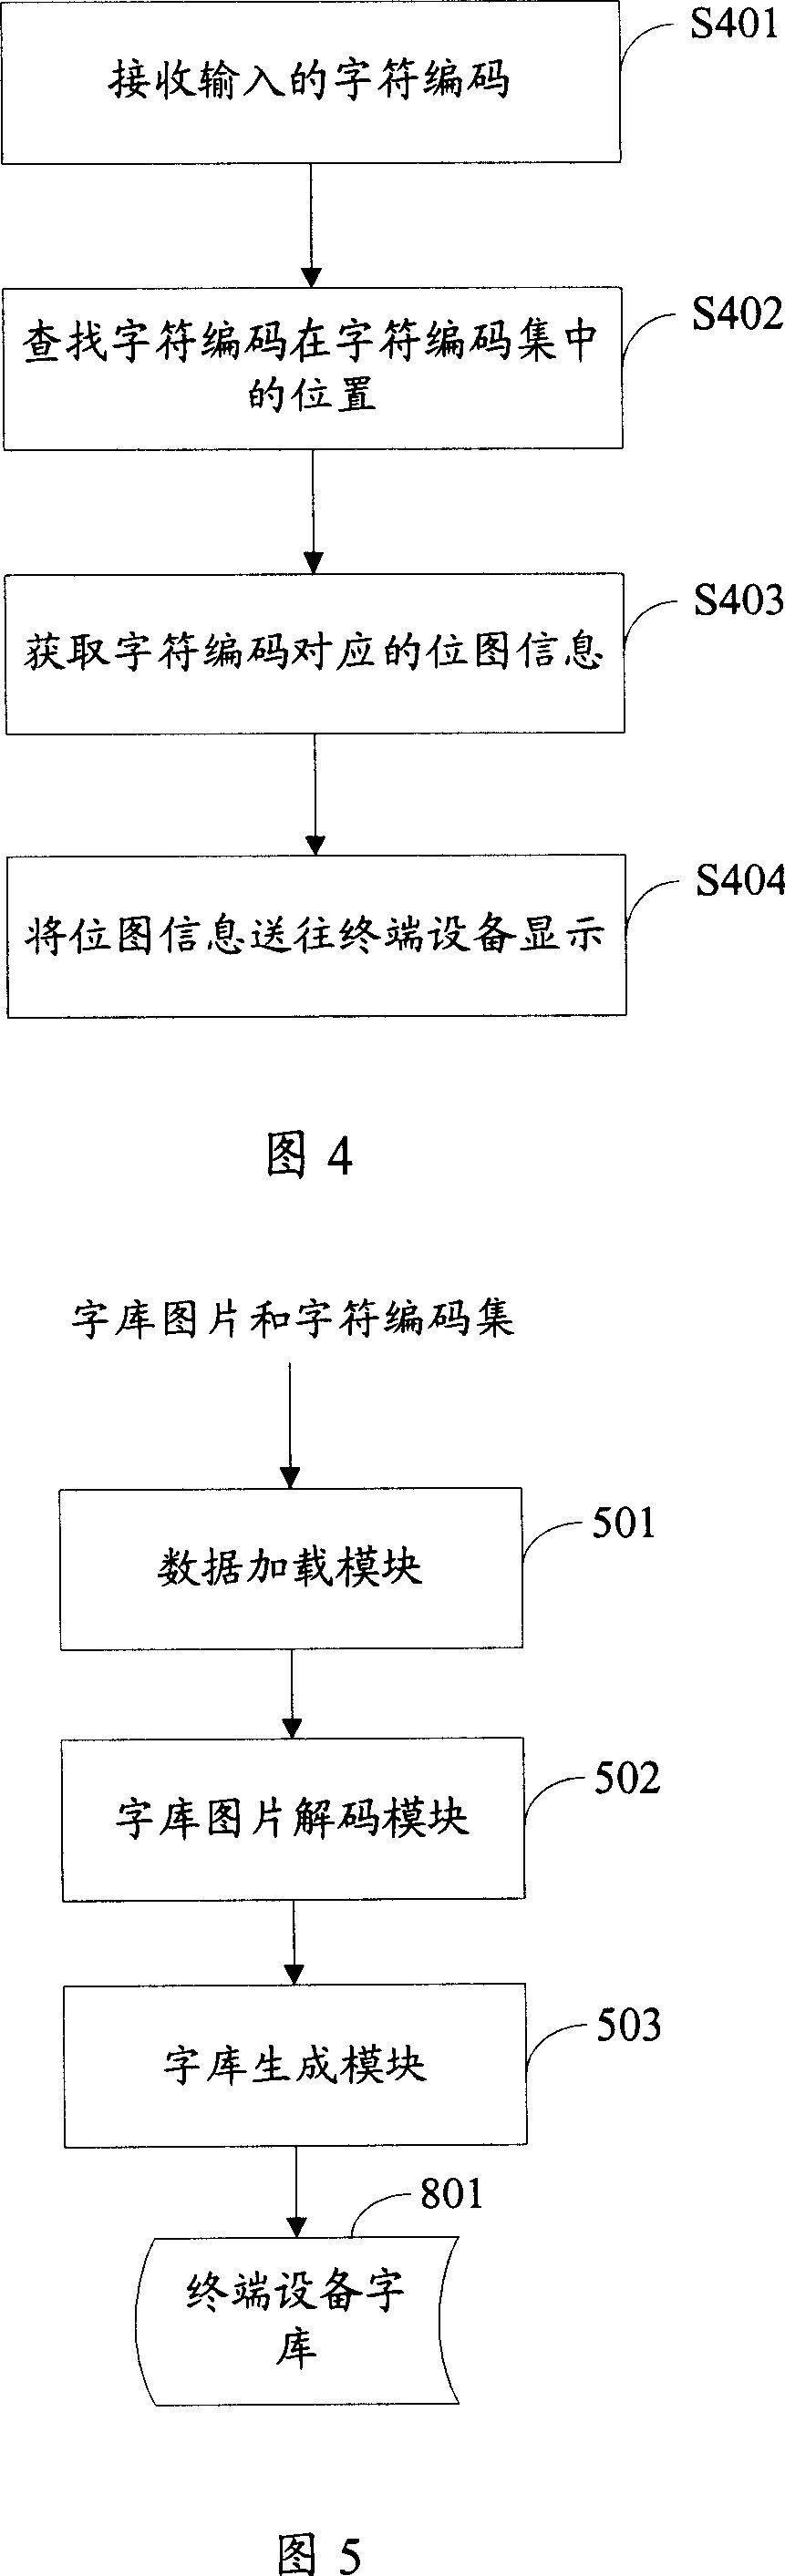 Method and system for inputting and displaying character